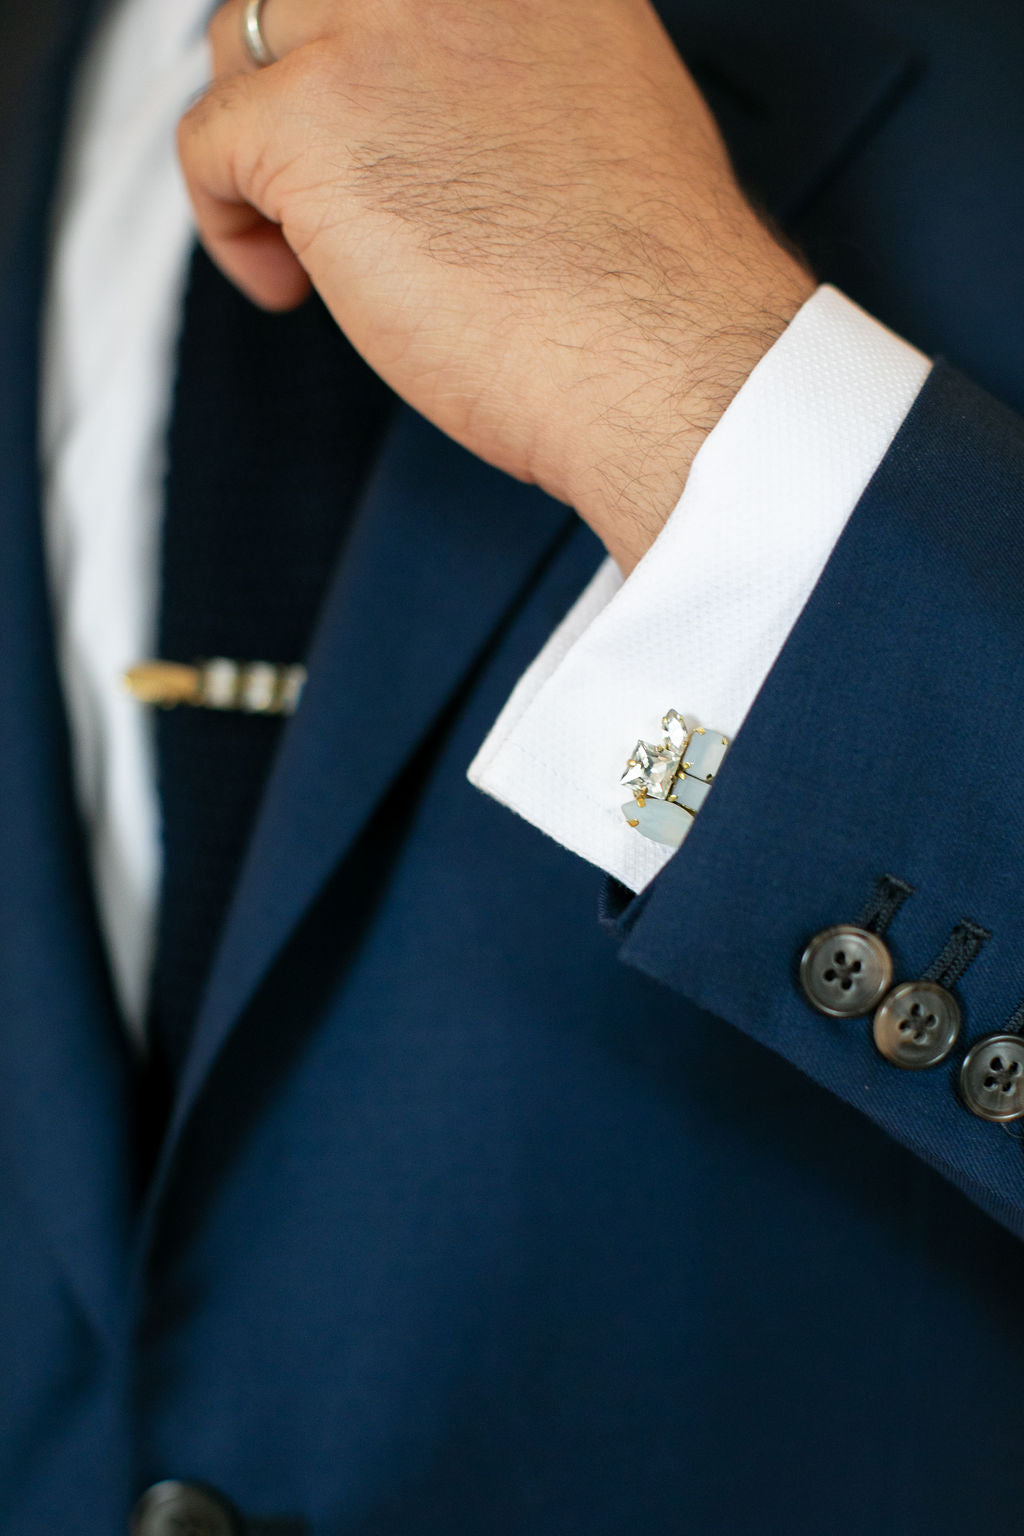 Adam | Bridal cuff-links | Hushed Commotion